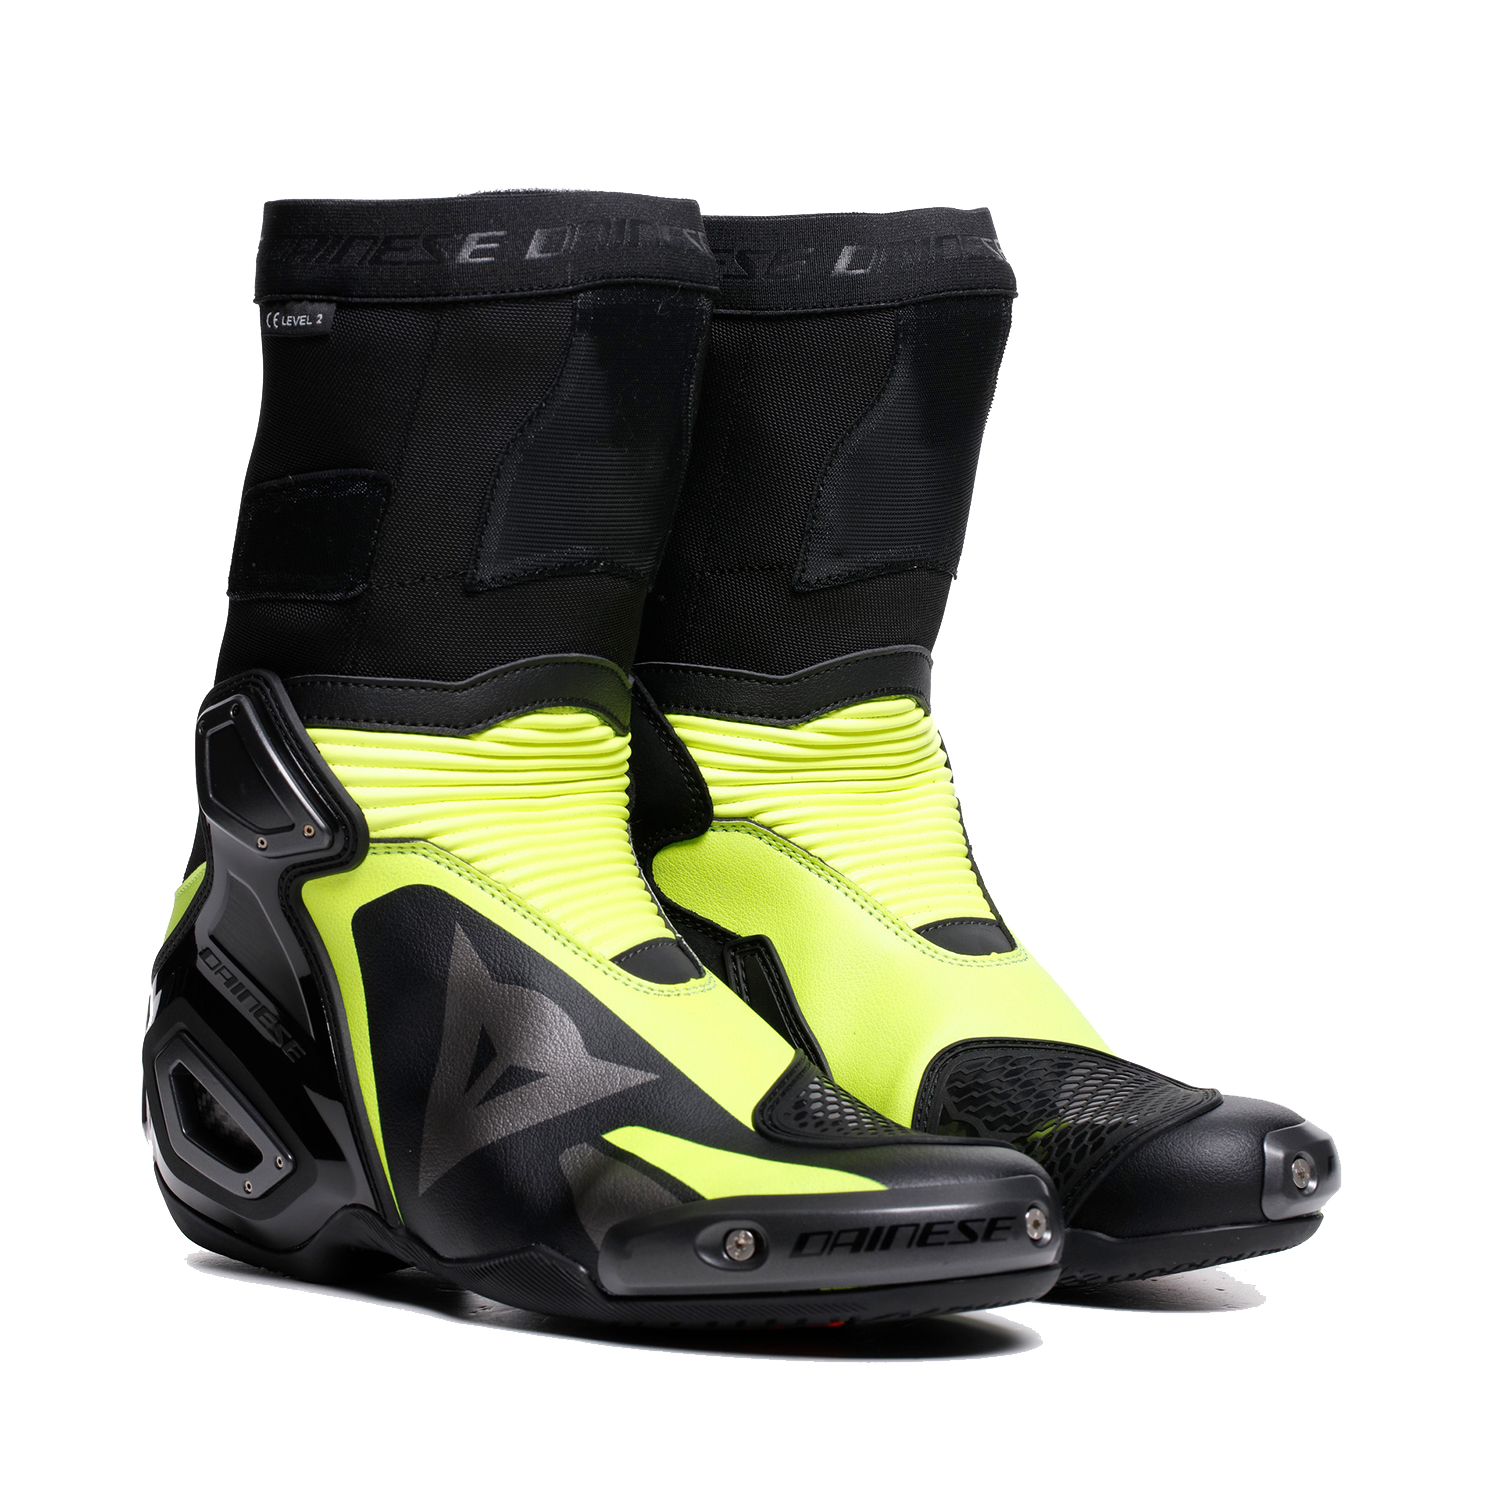 Image of Dainese Axial 2 Boots Black Yellow Fluo Size 40 EN